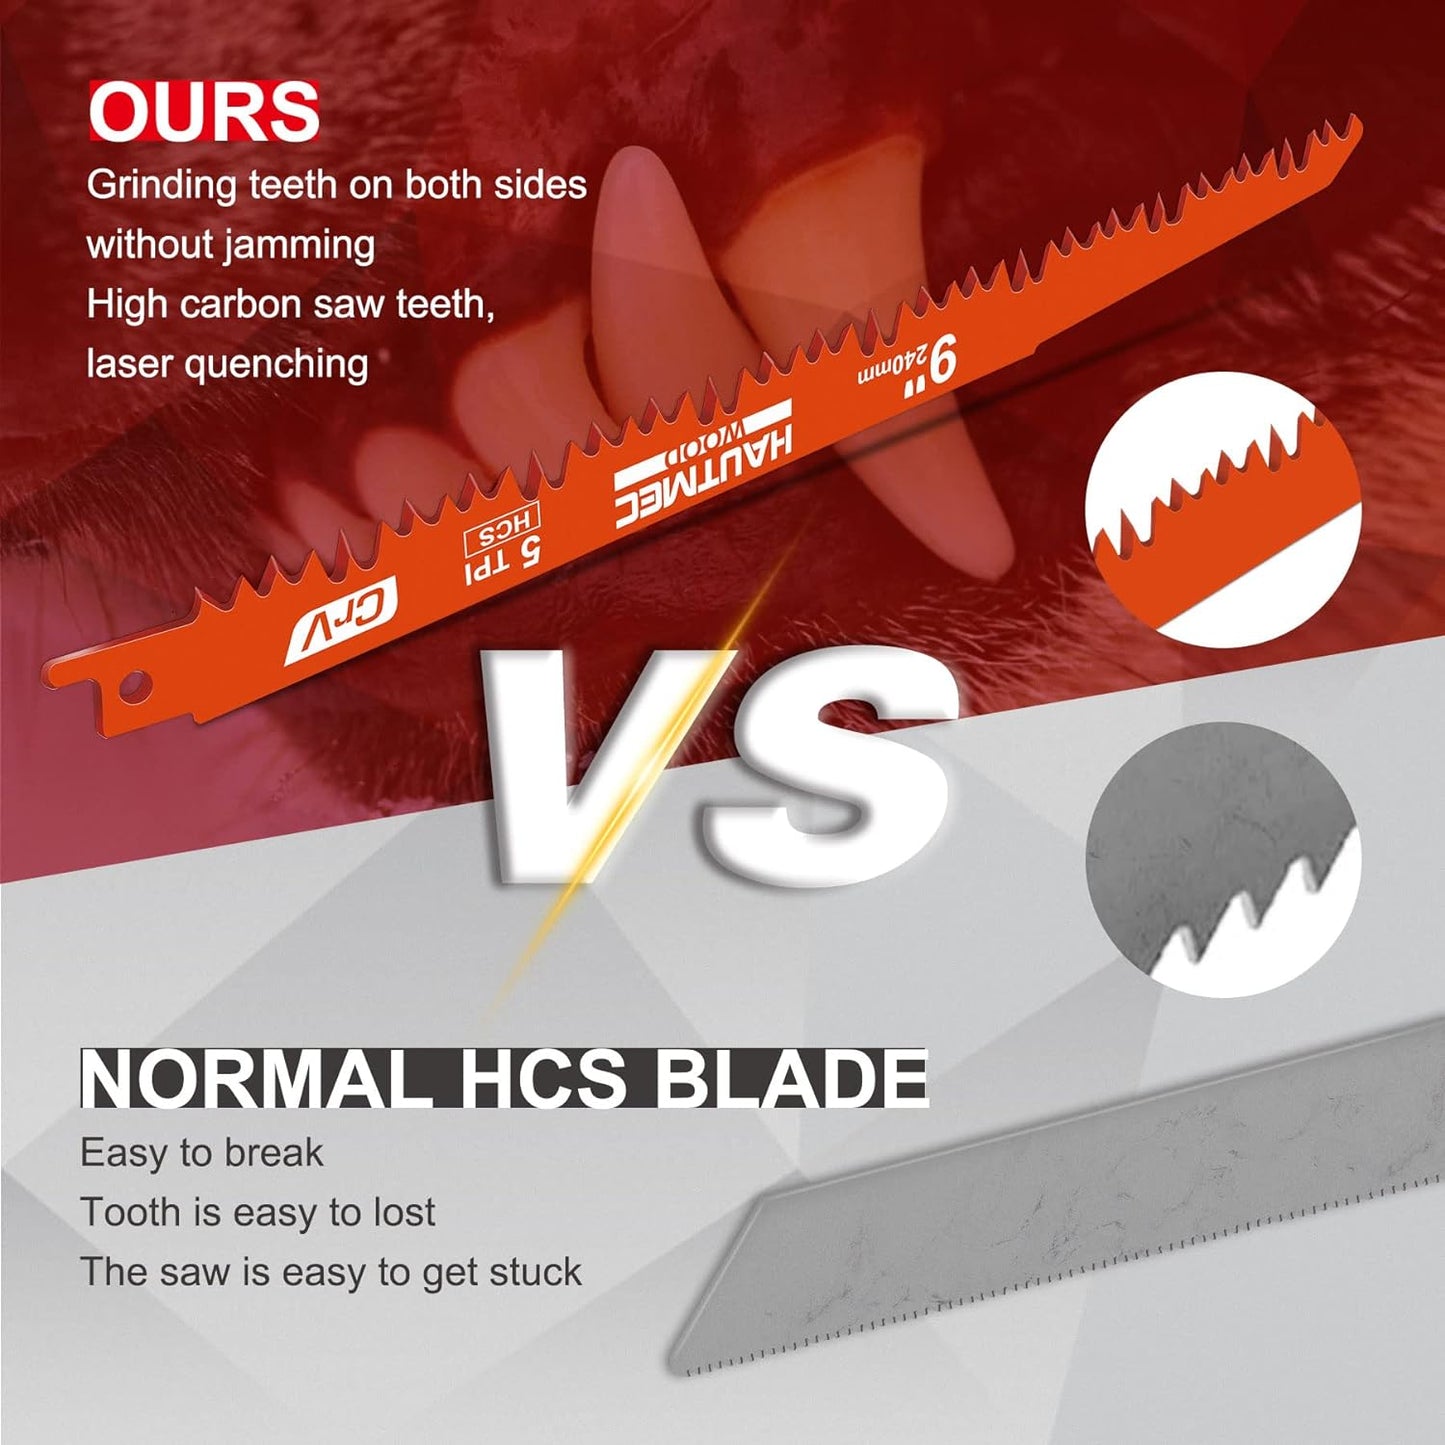 HAUTMEC 9 Inch Reciprocating Saw Blades,Sawzall Blades,Pruner Saw Blades 6 Piece Set for Wood and Trimming Cutting HT0167-CT